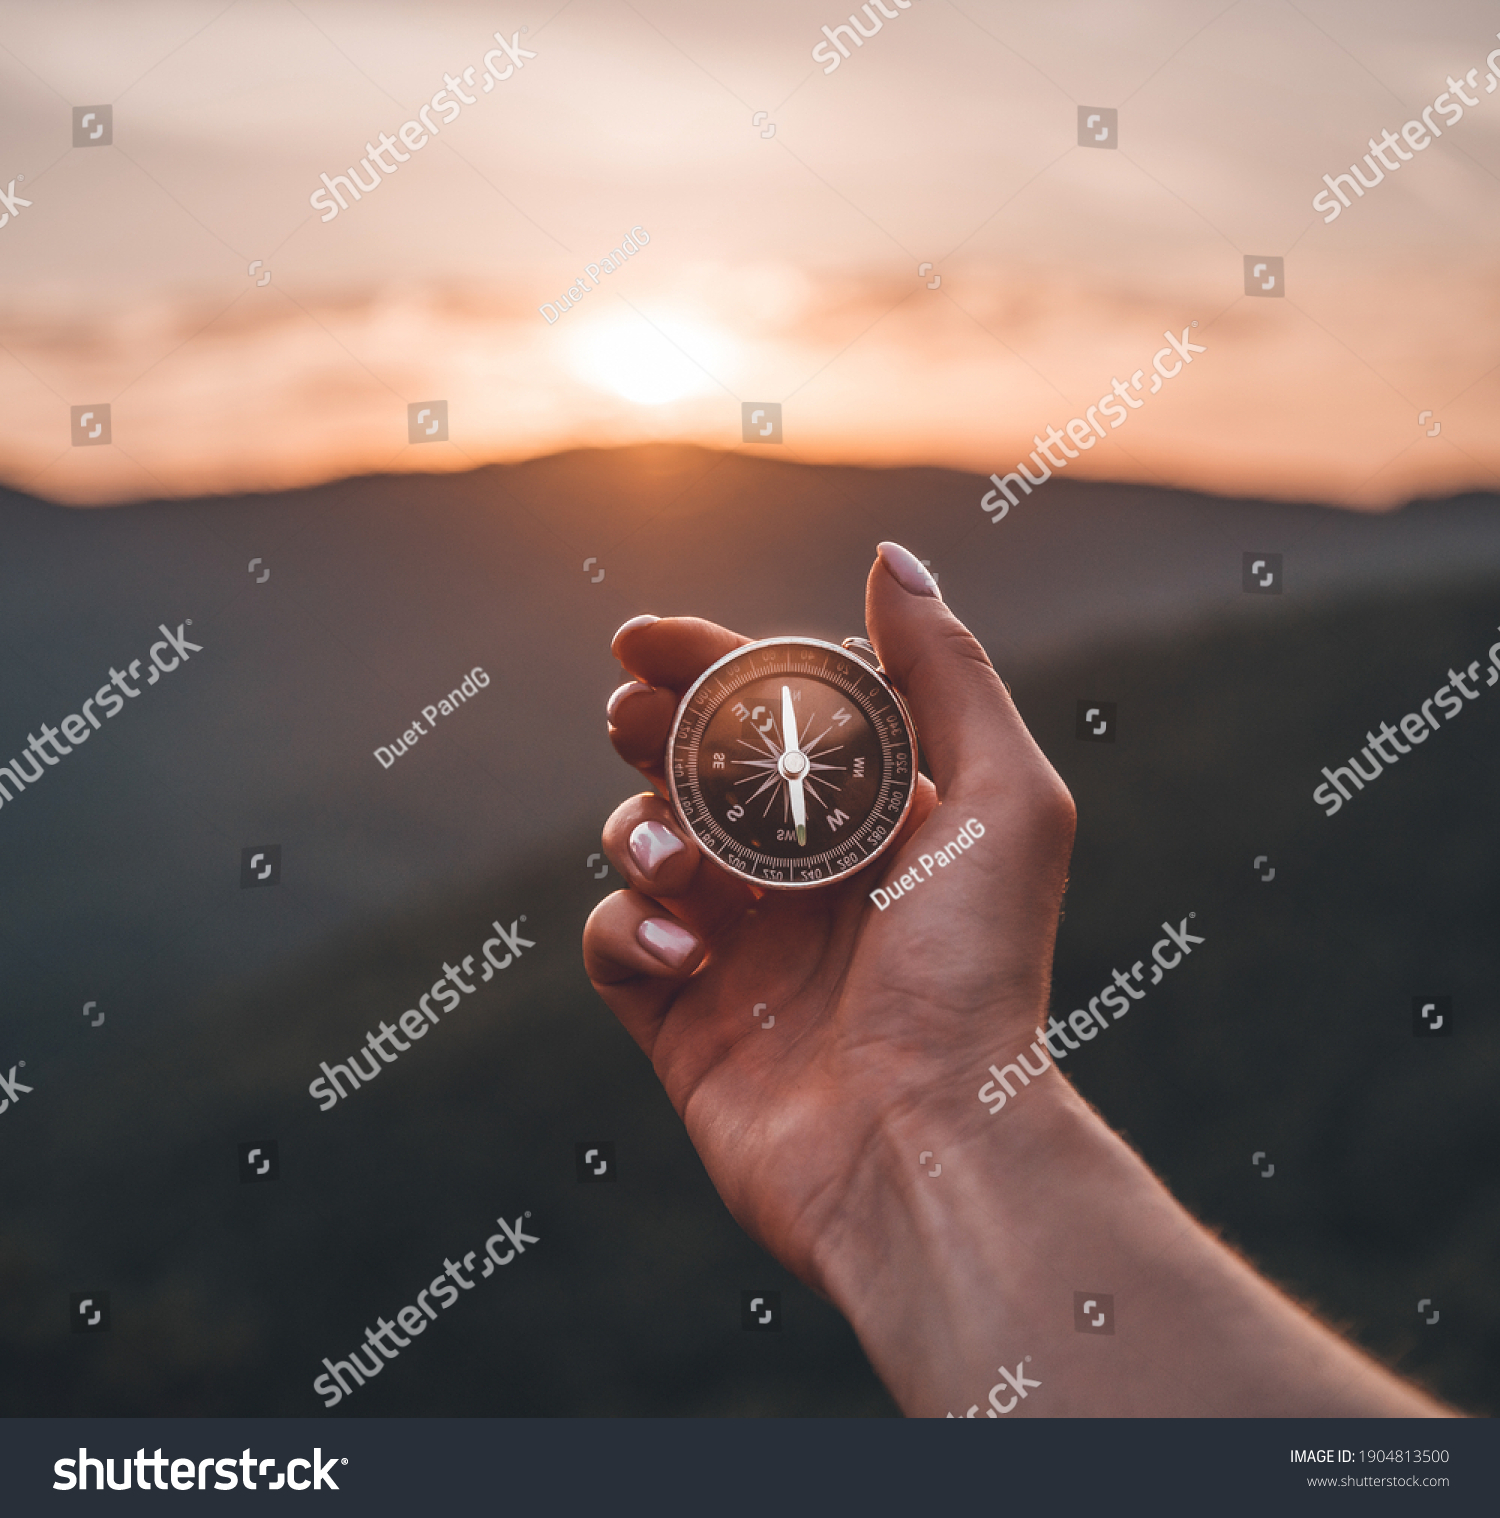 Traveler explorer young woman holding compass in a hand in summer mountains at sunrise, point of view. #1904813500